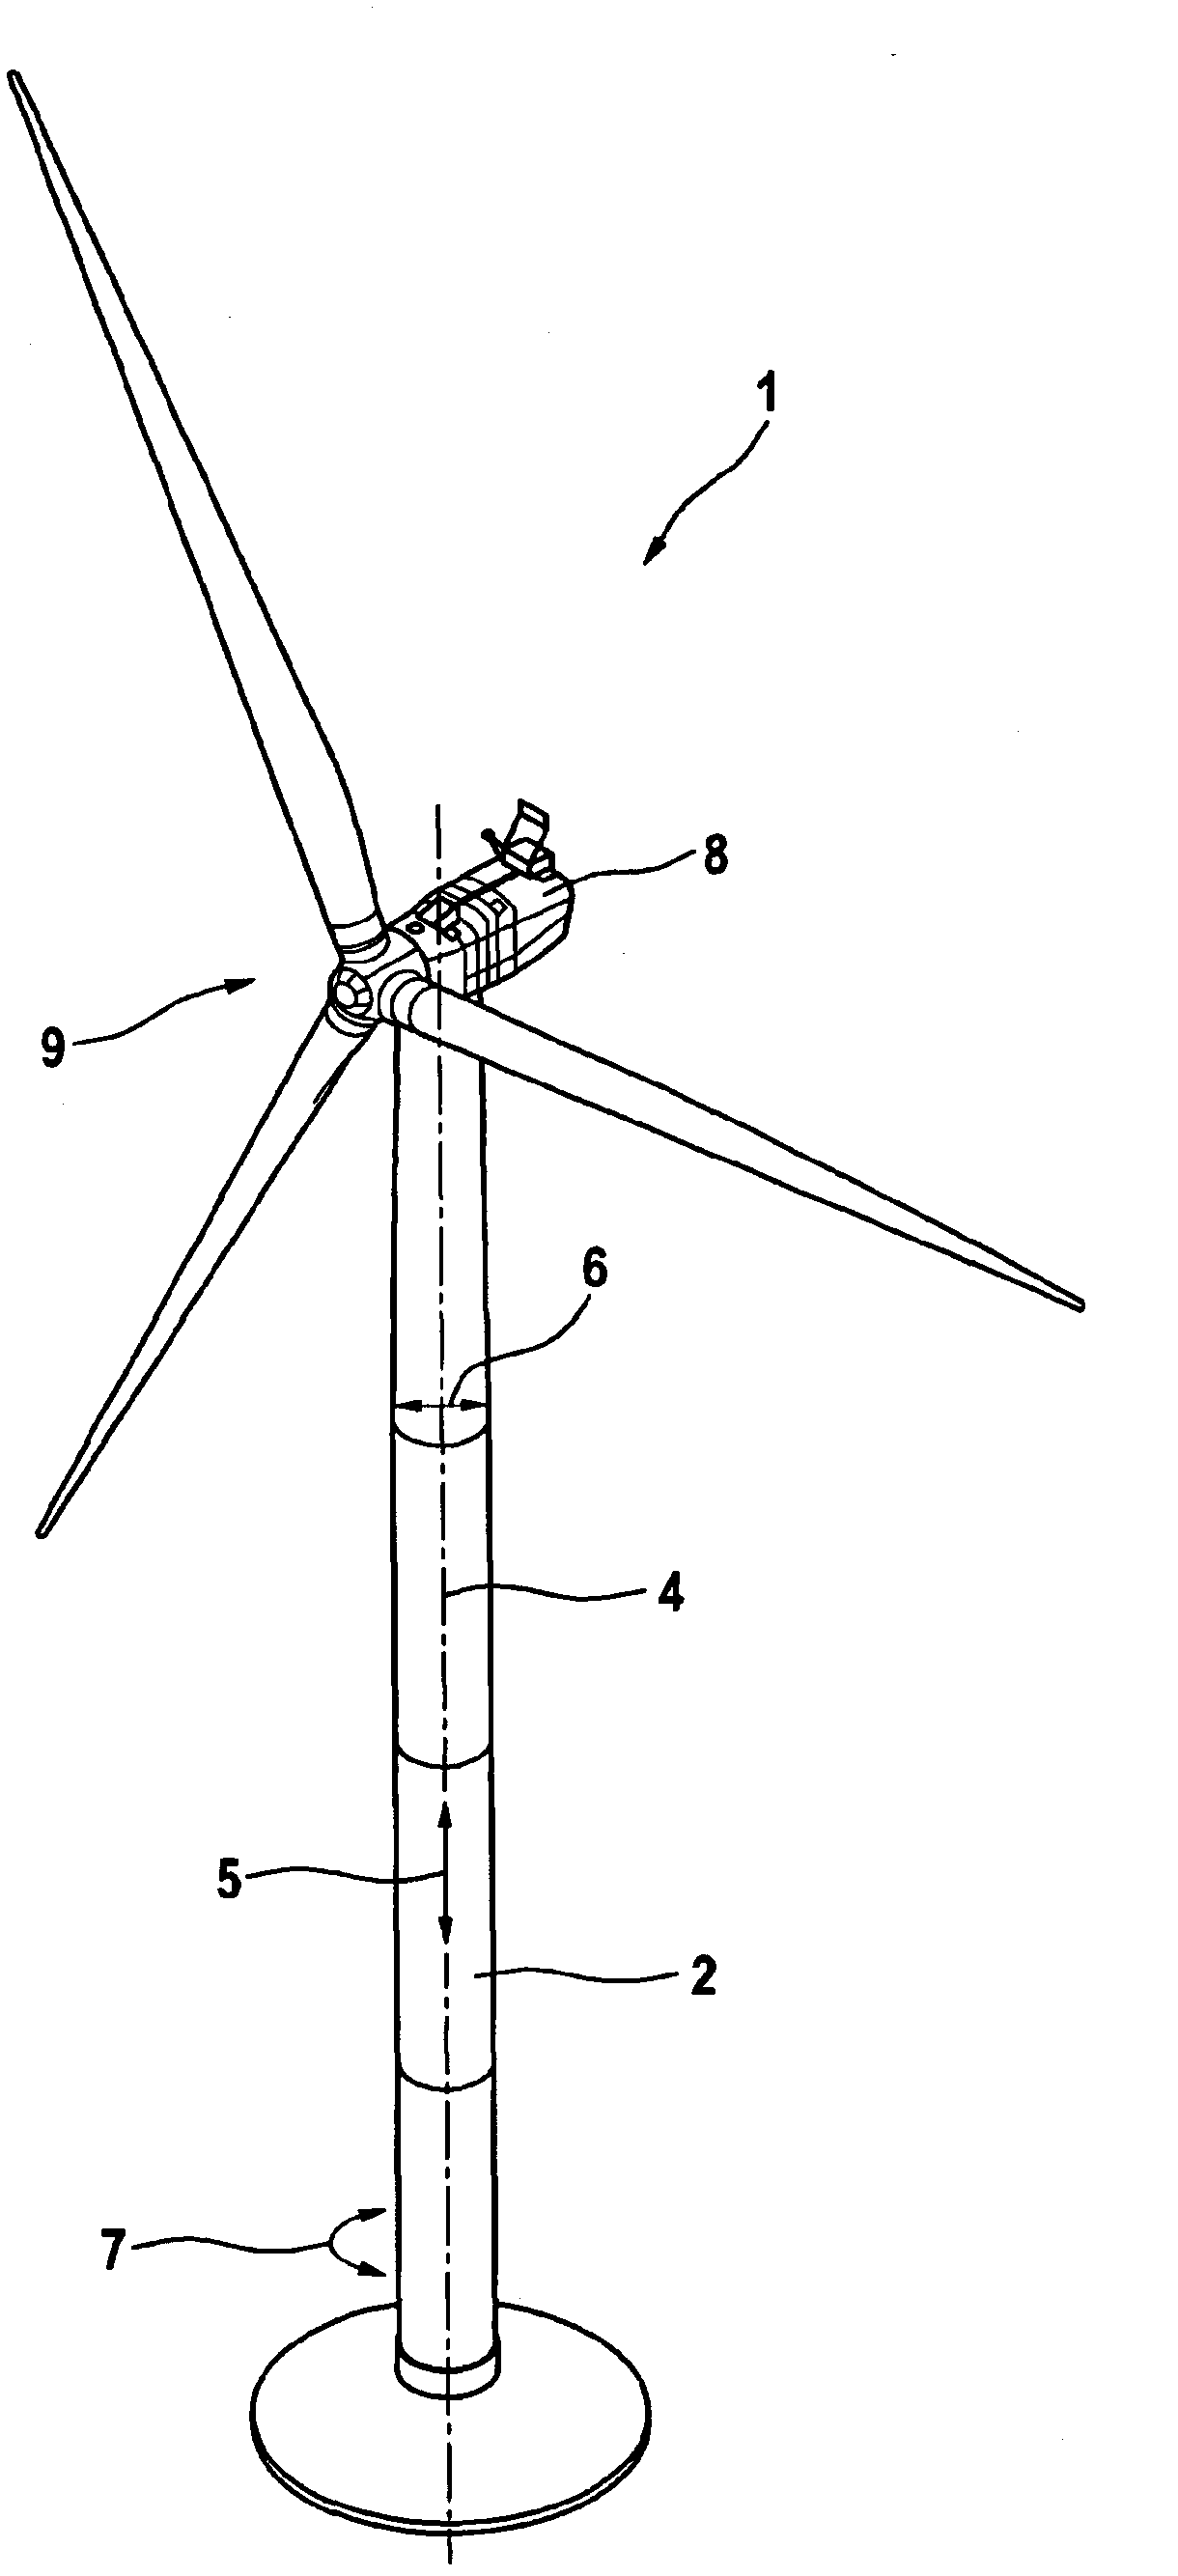 Tower for a wind turbine